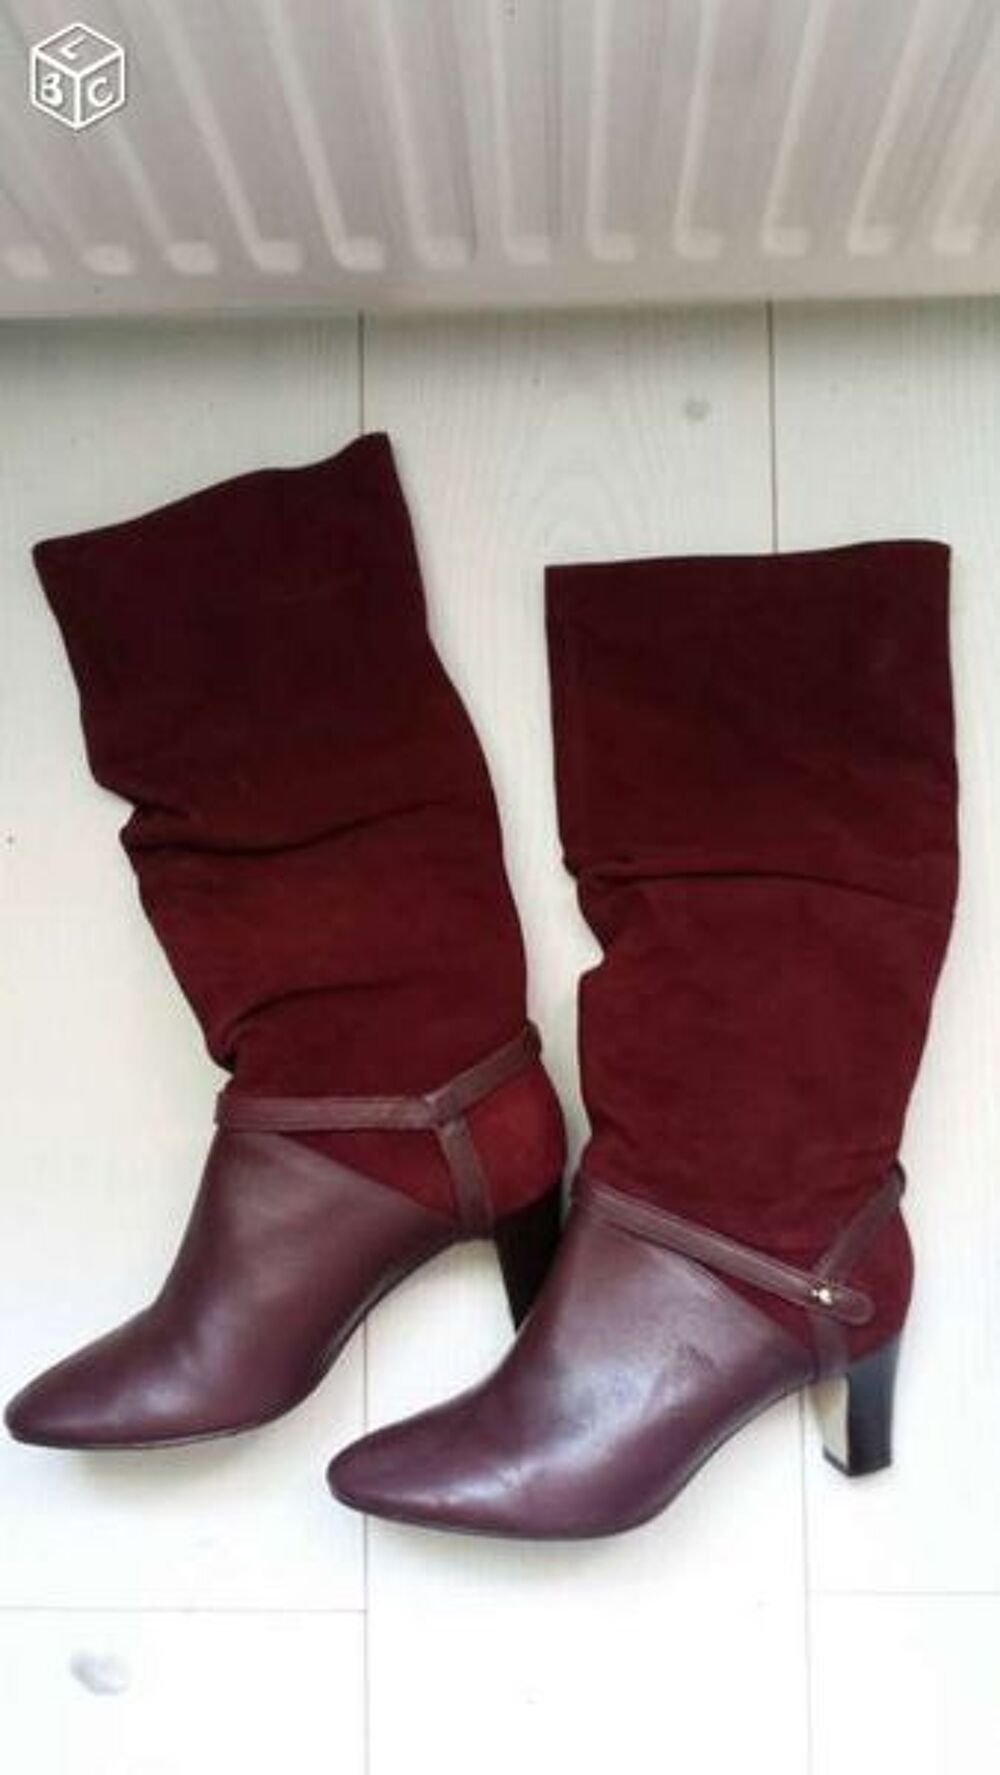  Bottes chaussures Chaussures